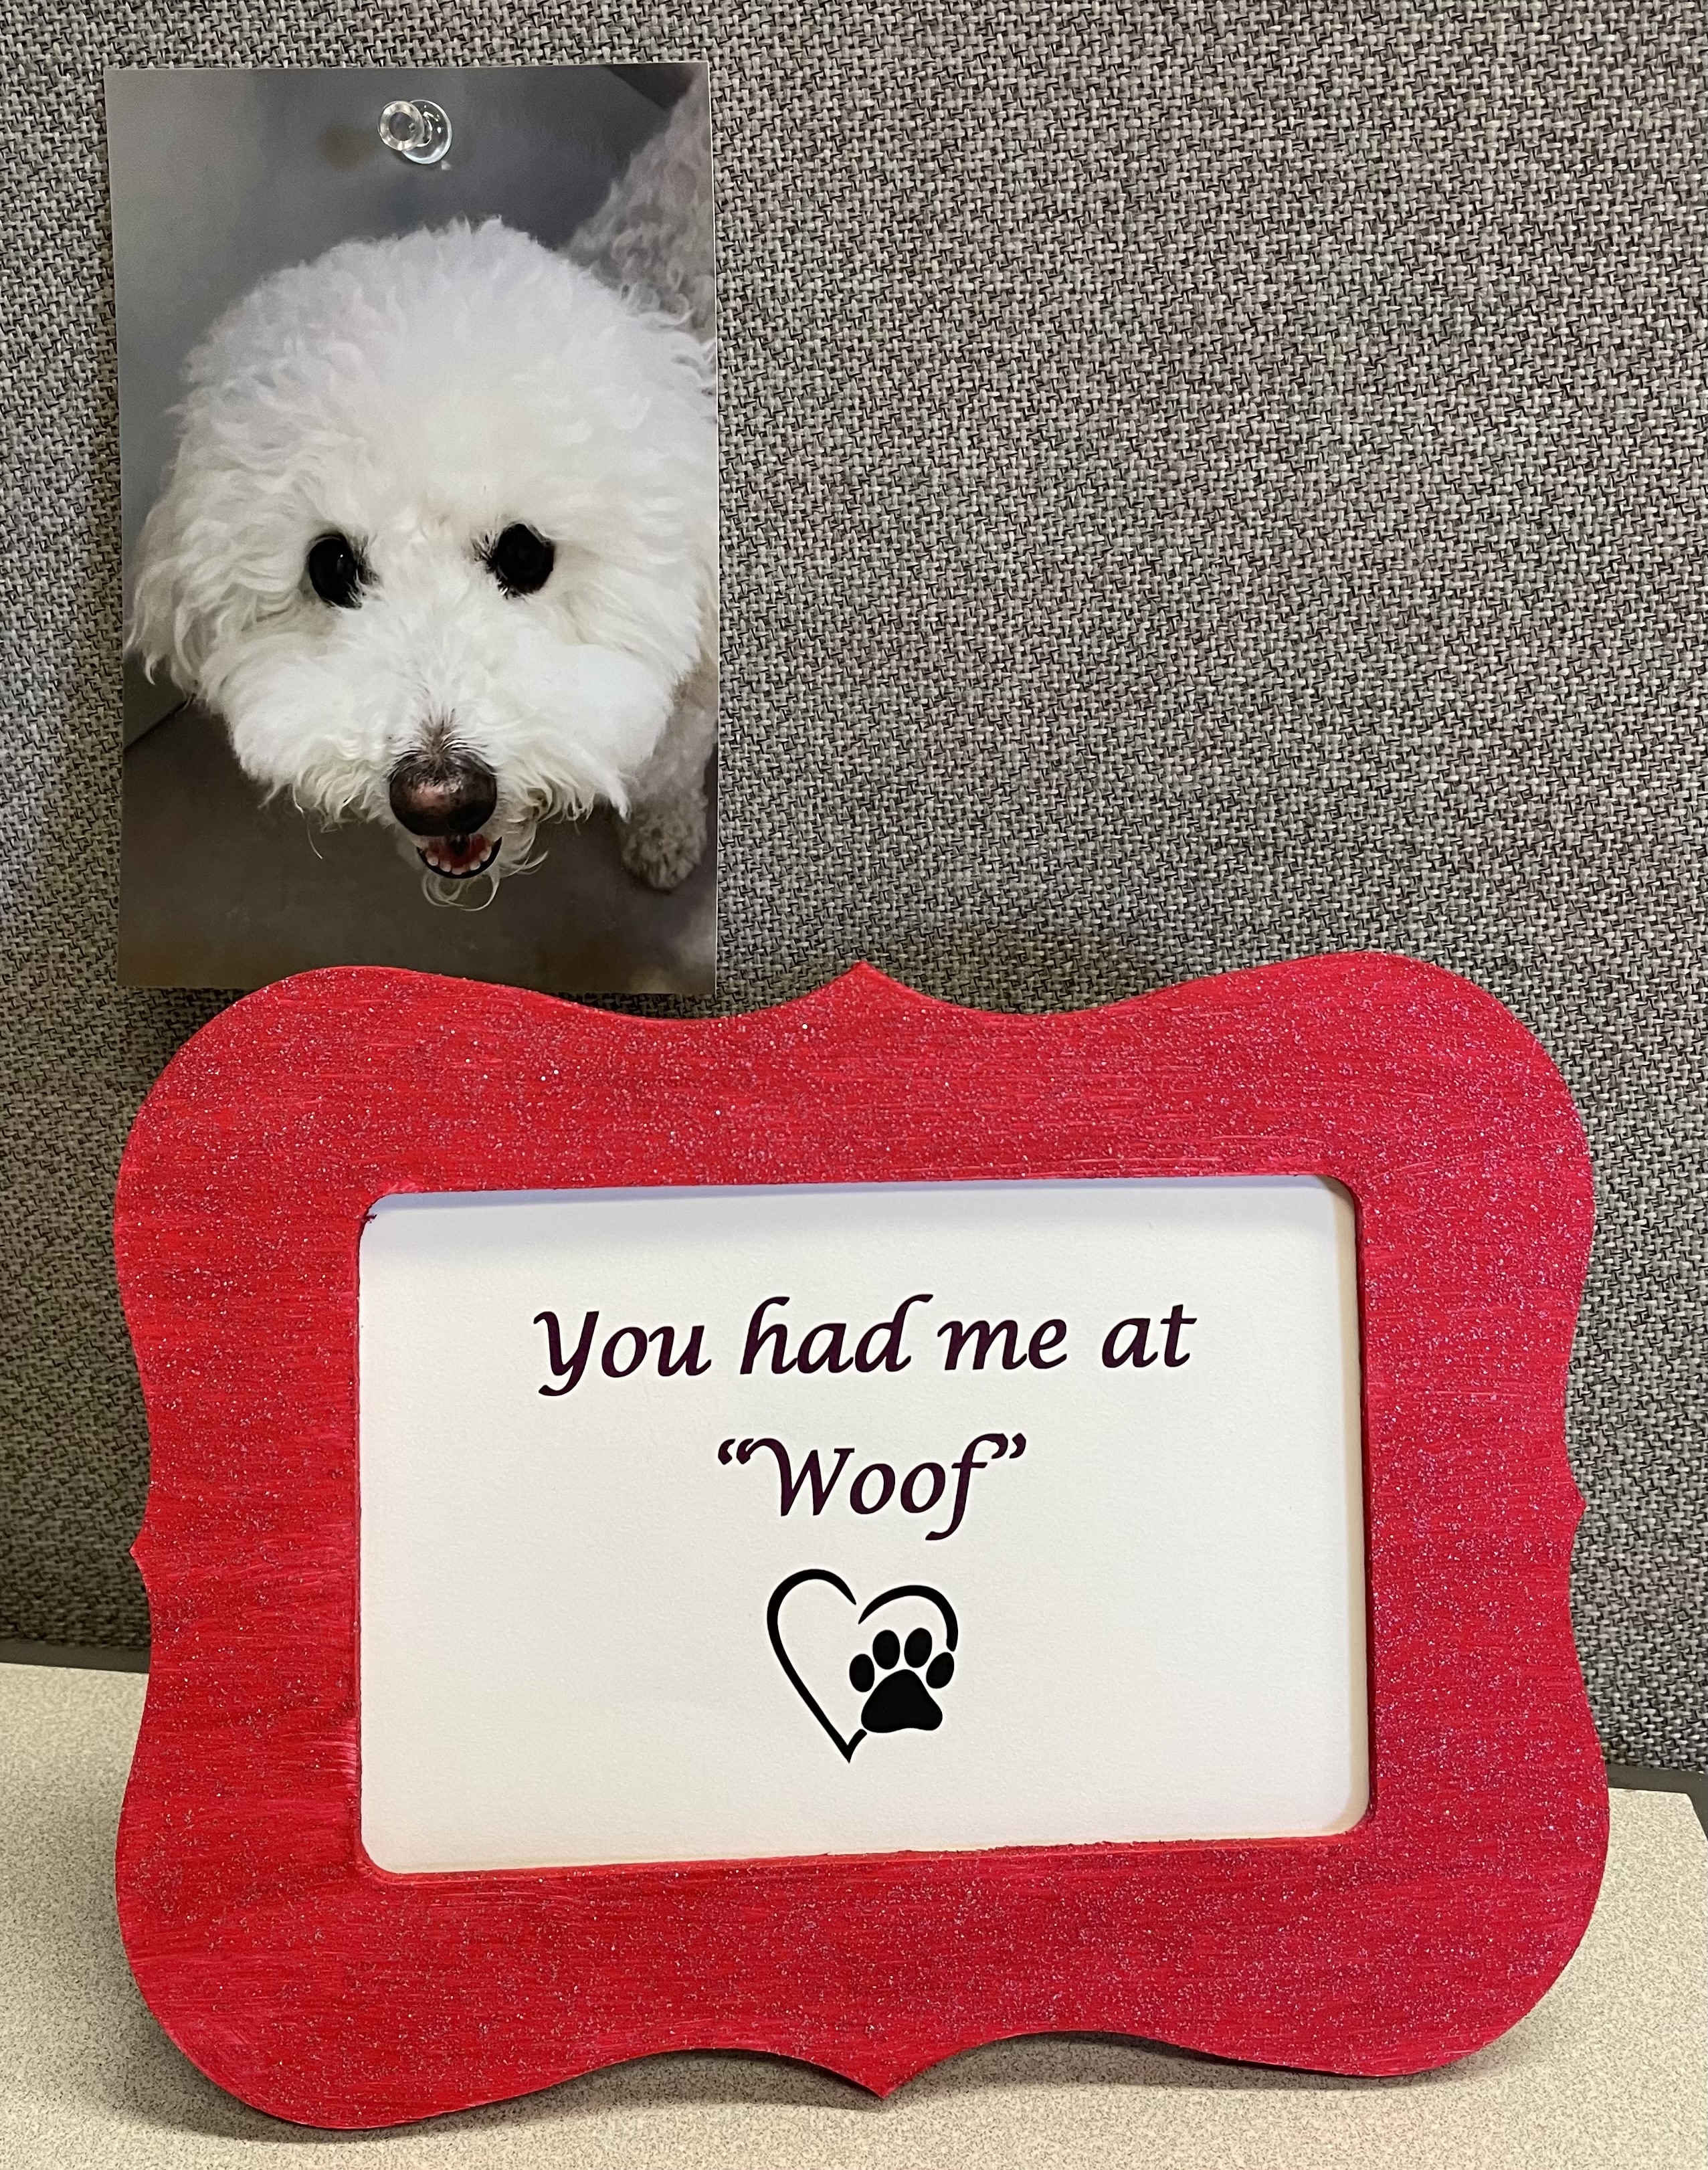 Completed valentine picture frame craft with photo of a poochon behind it.